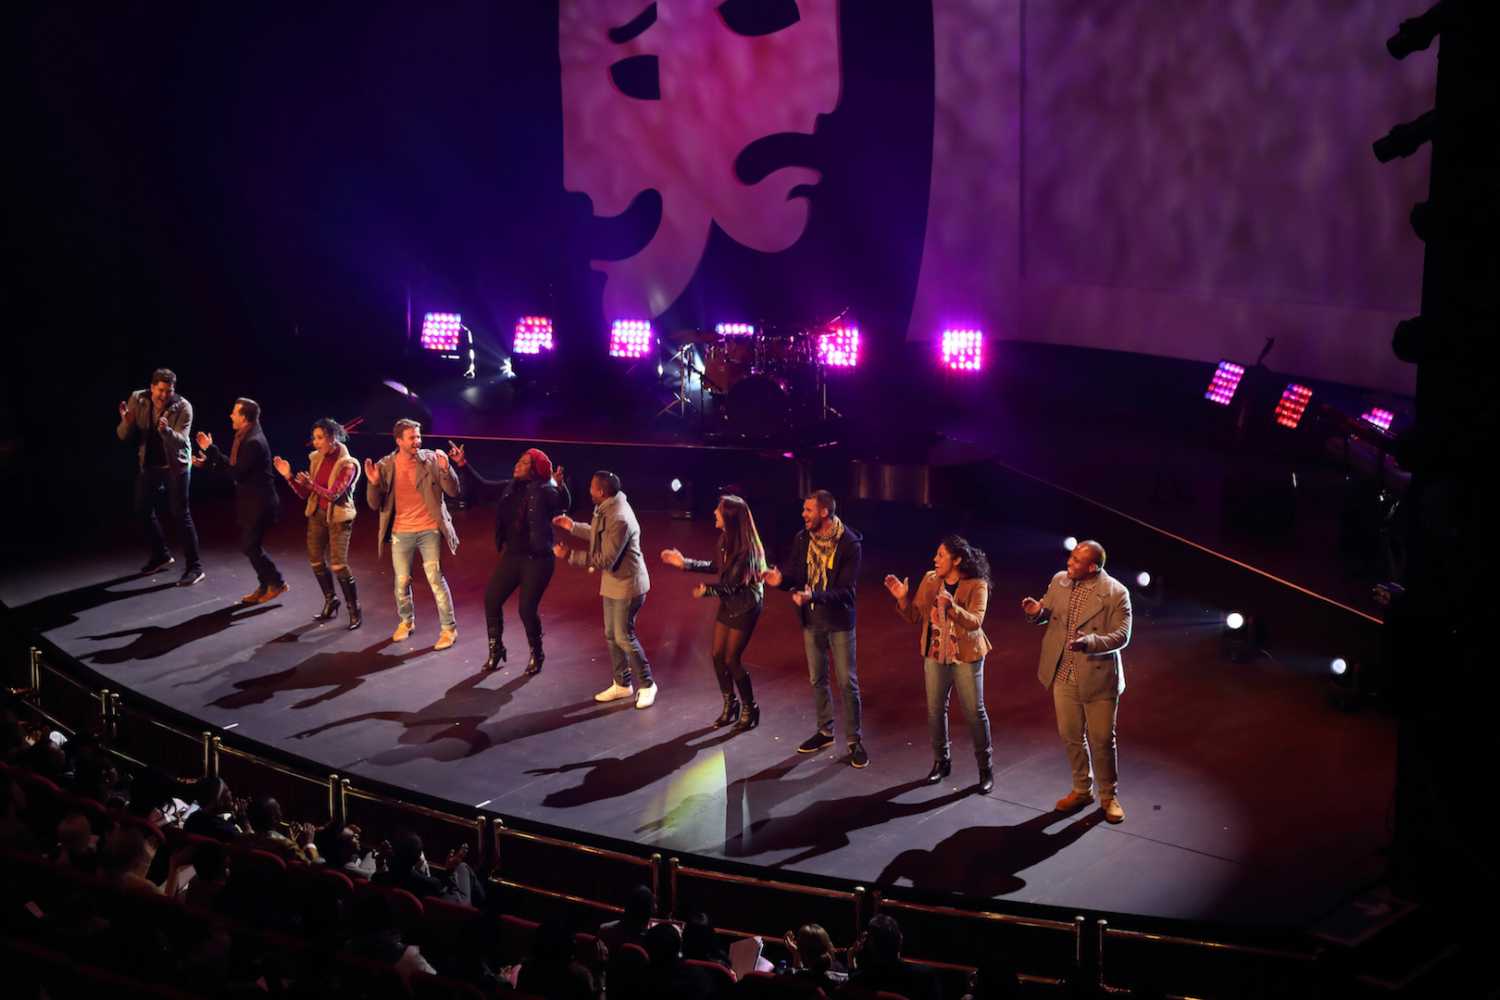 The Naledi Awards were staged at the Lyric Theatre in Johannesburg